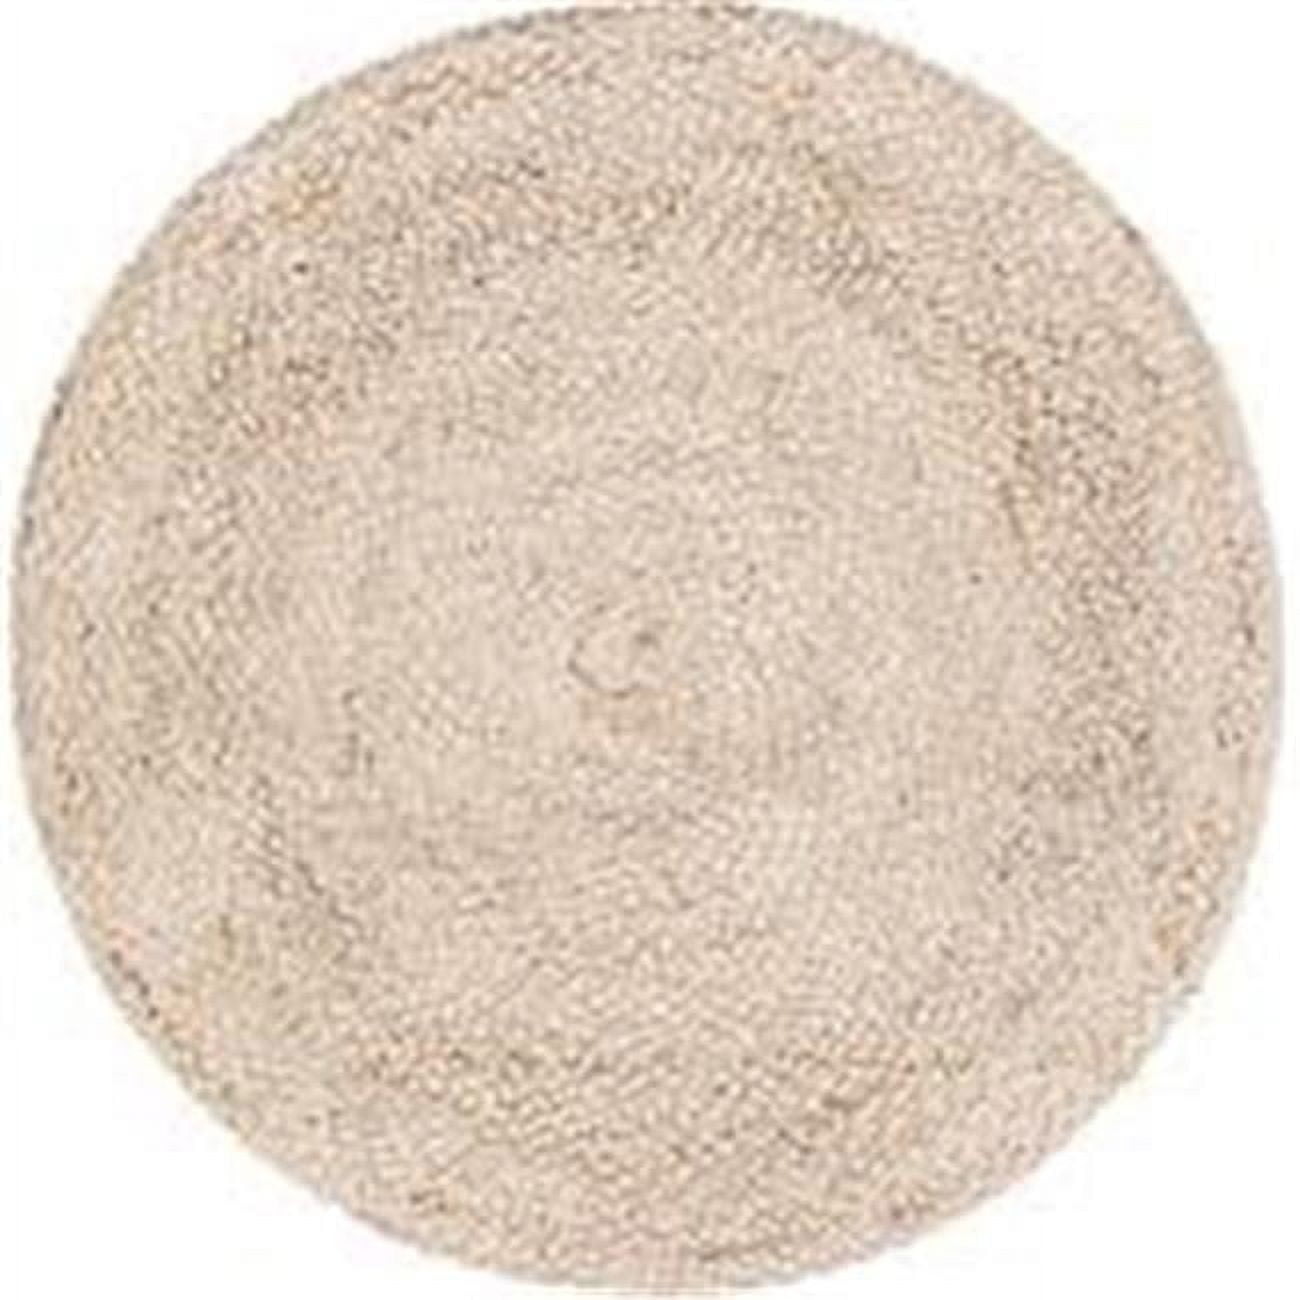 Picture of Anji Mountain AMB0395-080R 8 x 8 ft. Round Speckled Hen Area Rug - Tan, Ivory